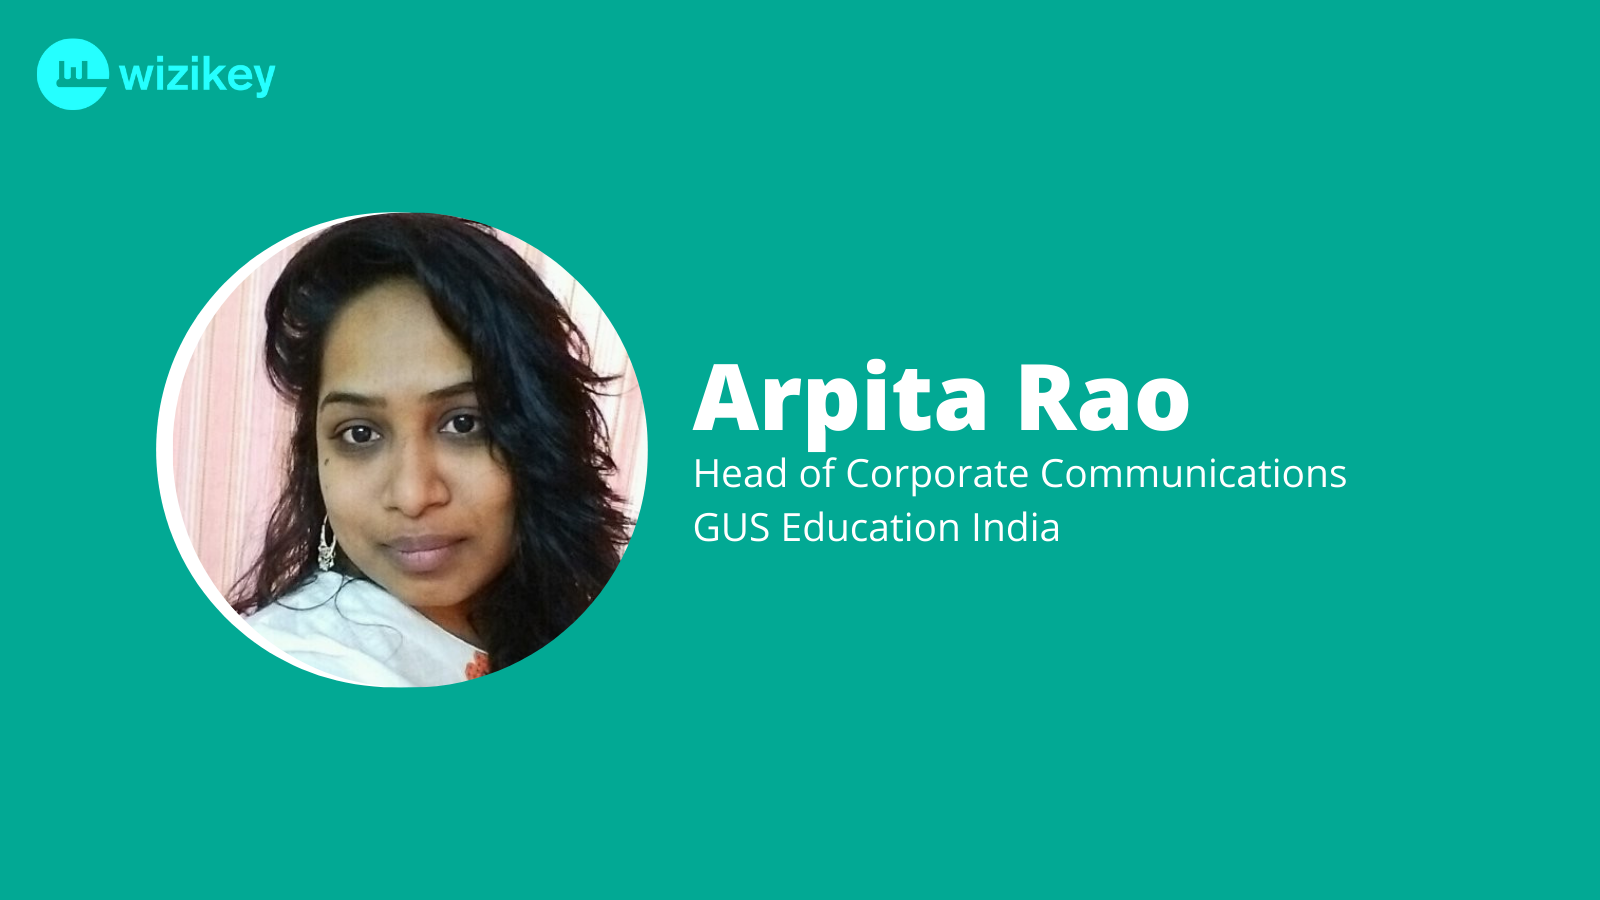 Generating data is very crucial: Arpita Rao from GUS Education India